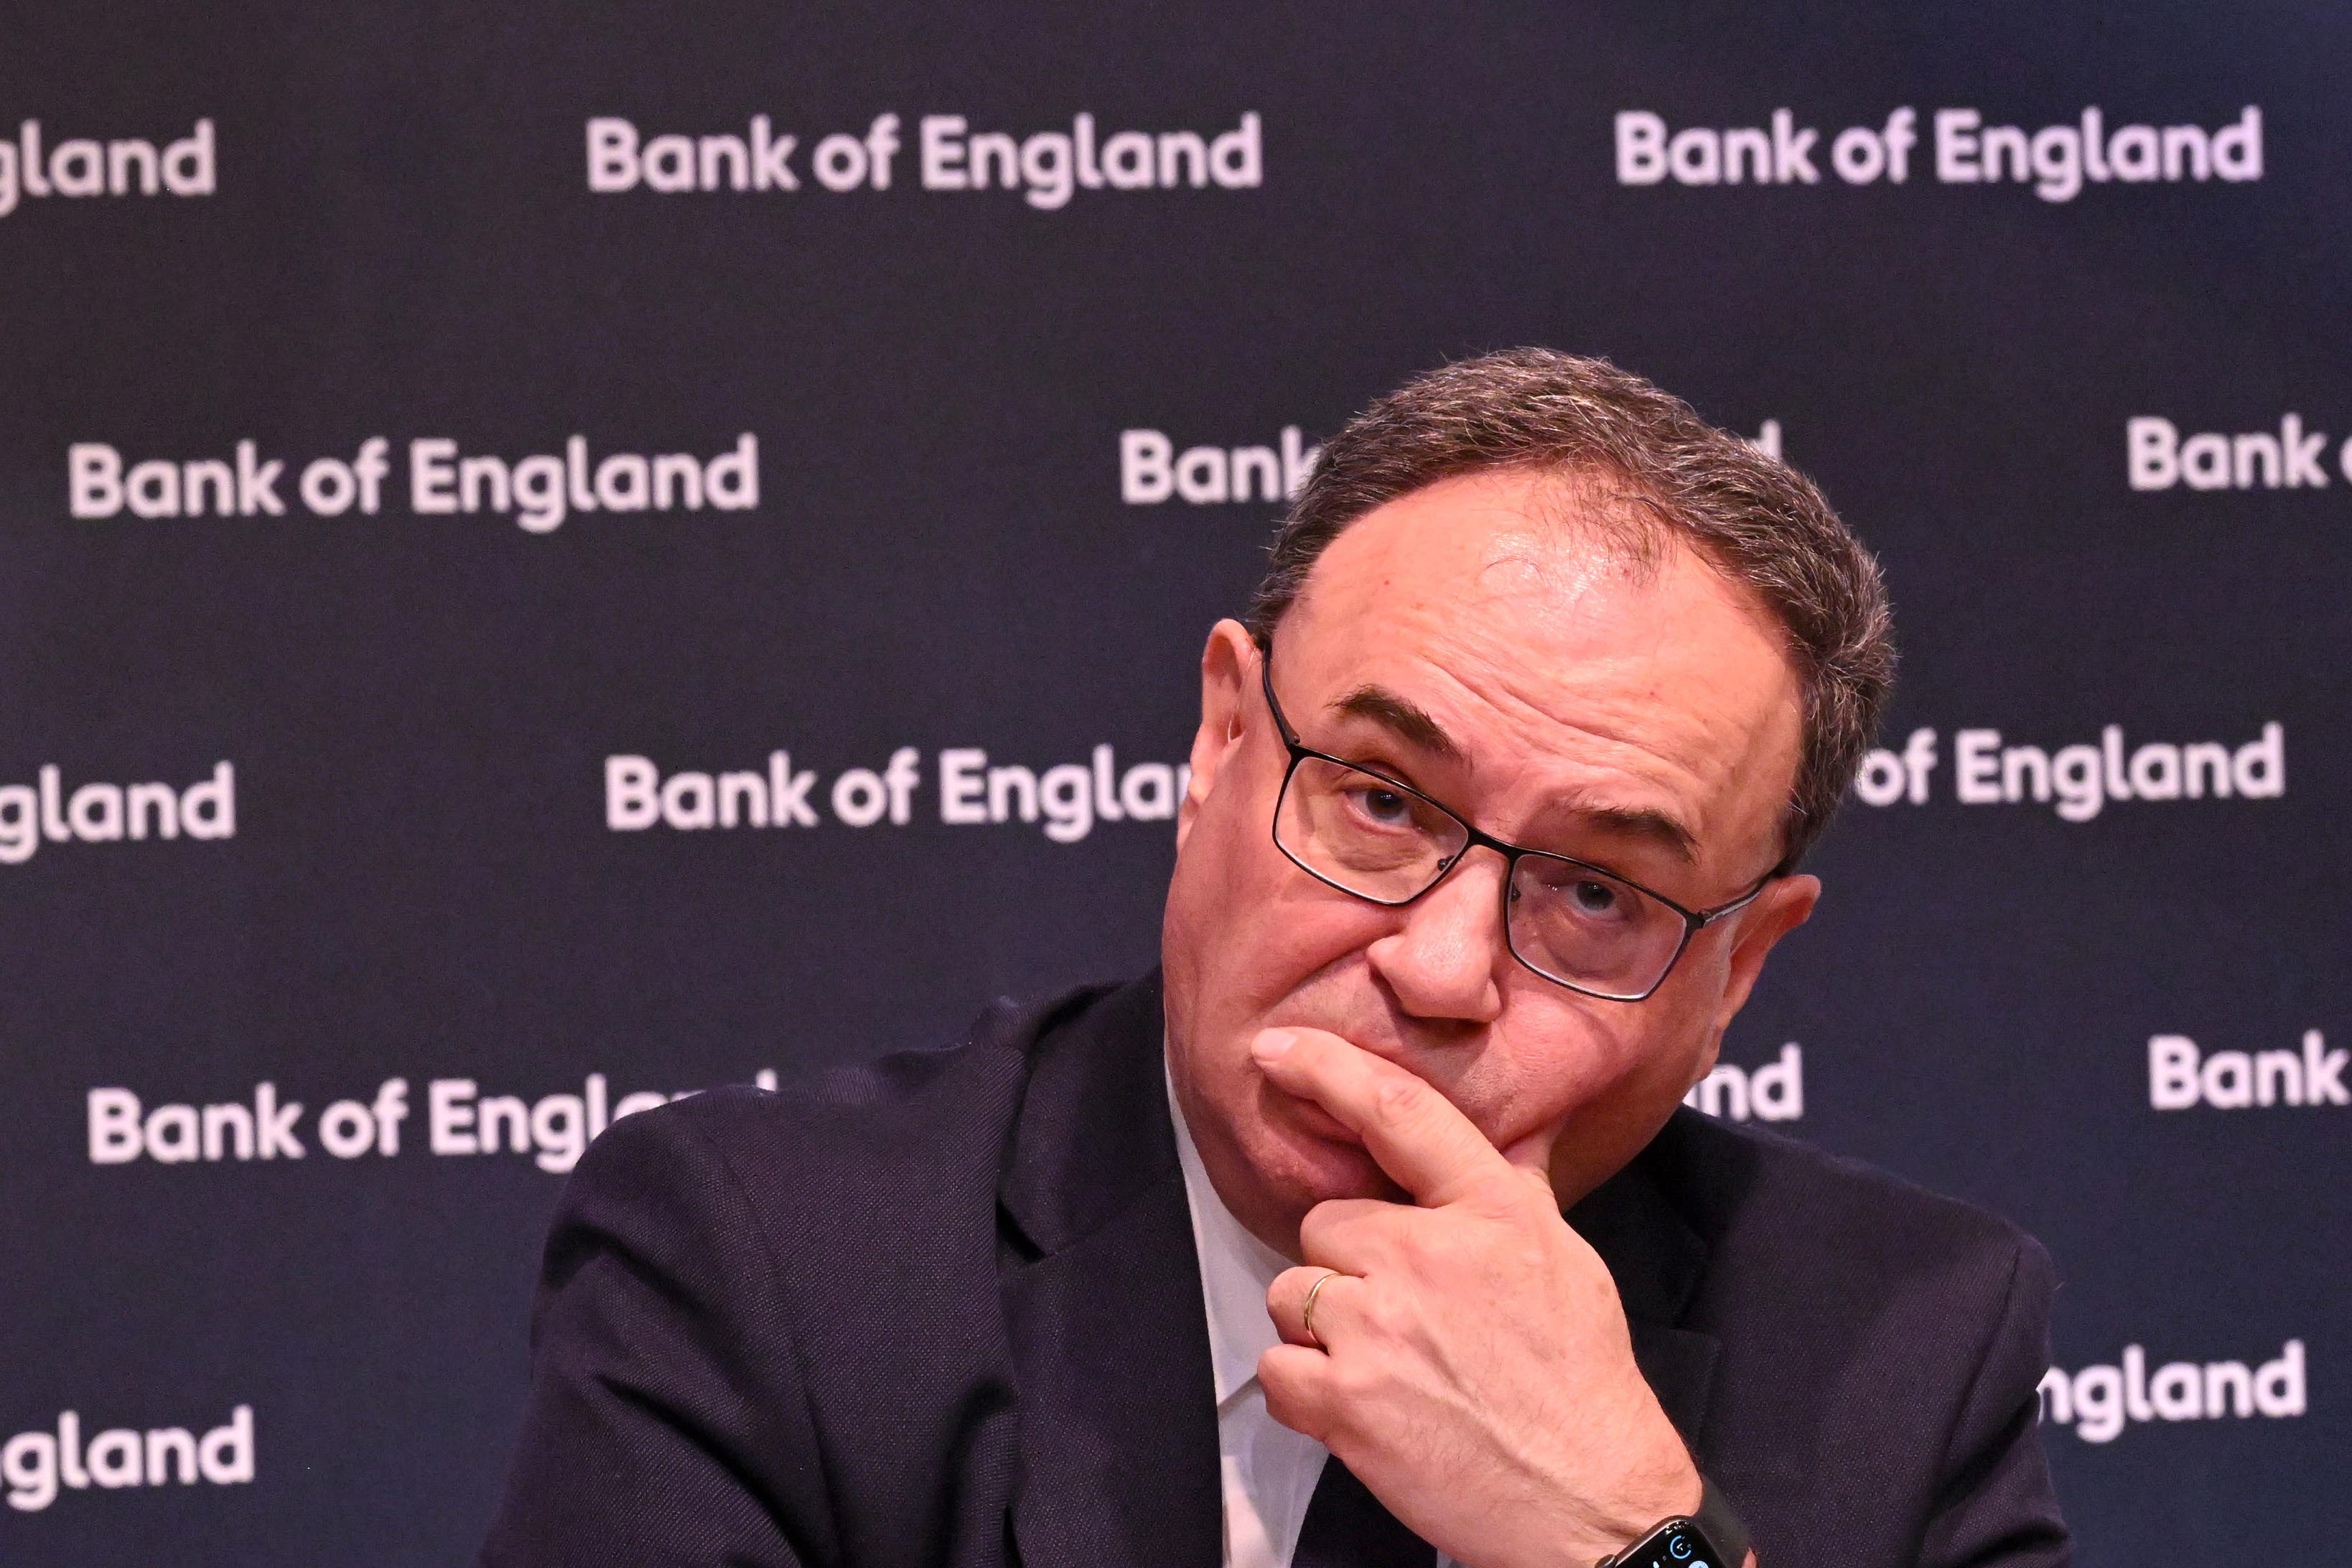 The governor of the Bank of England probably does not subscribe to the view that businesses are profiteering